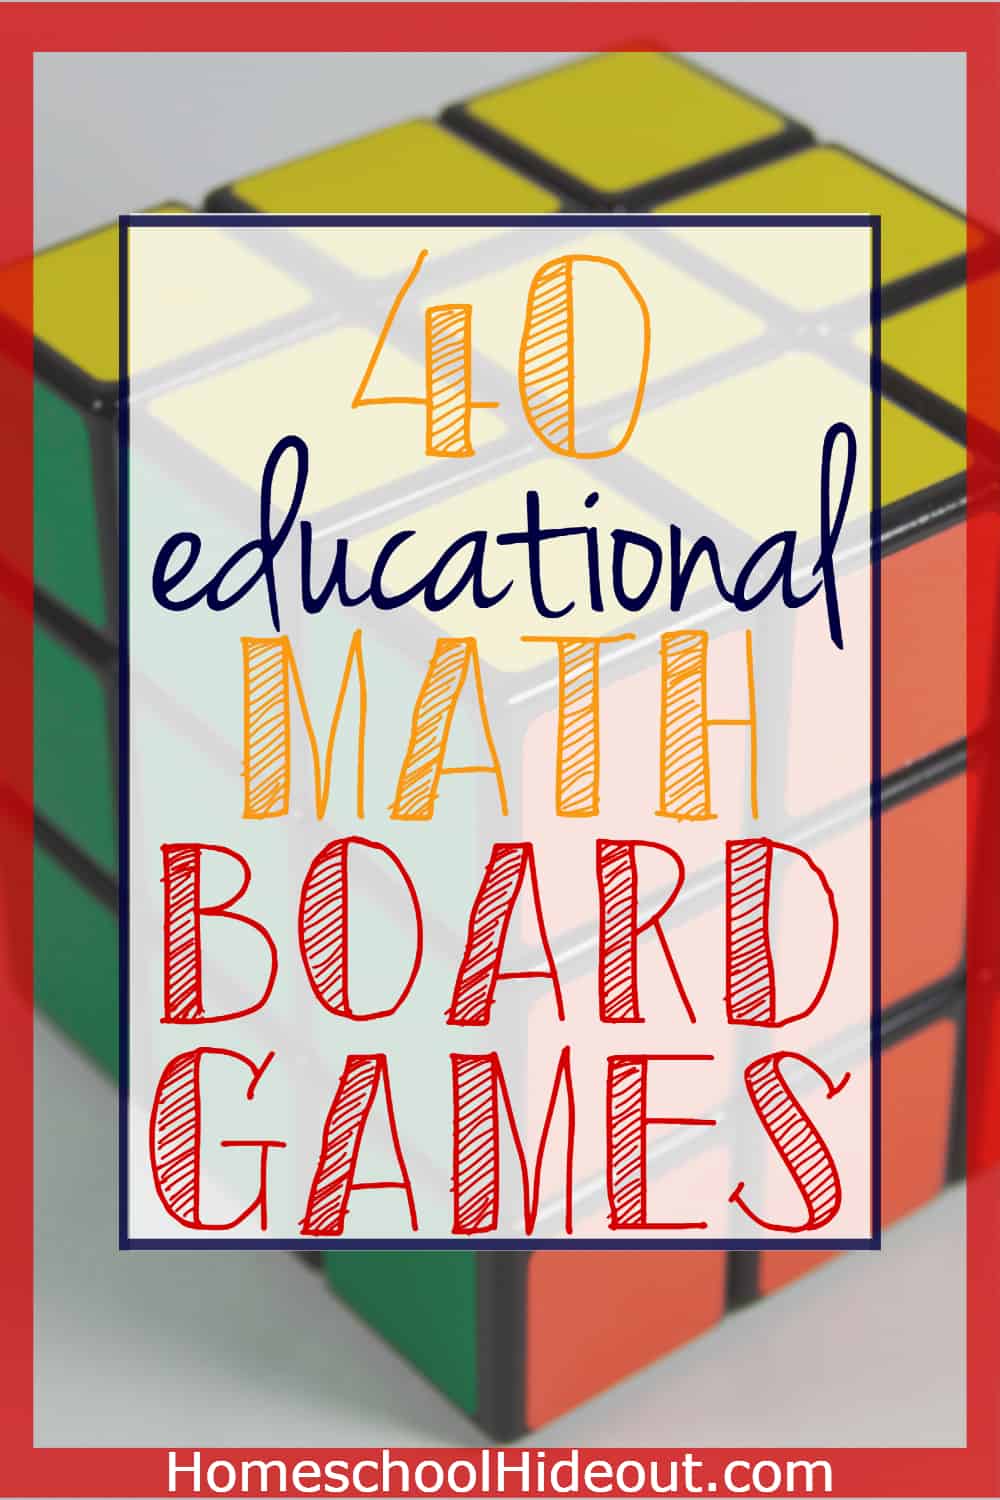 40 of the top educational math board games on the market! Take your #familygamenight to the next level!